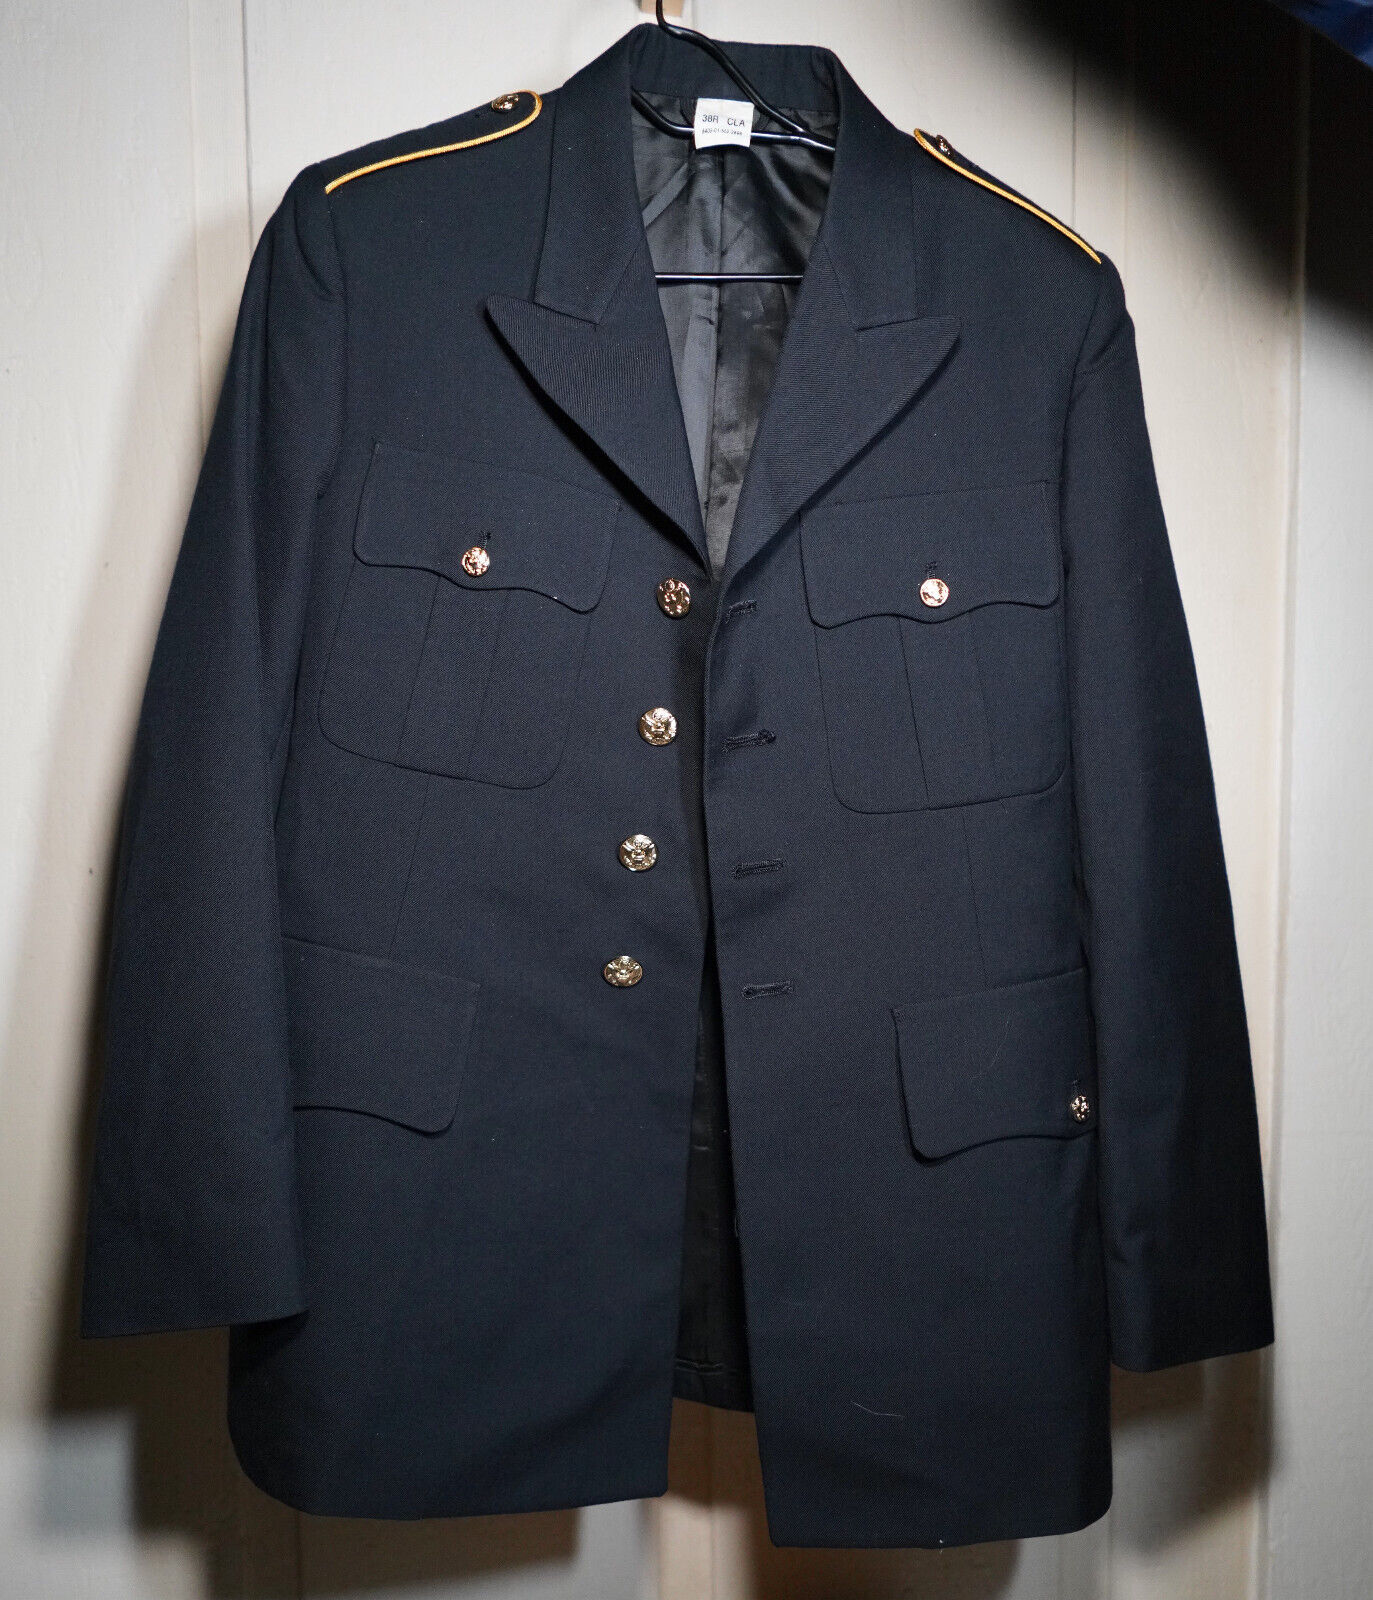 Army Dress Uniform Coat Jacket Size 38R ASU American Military Service Officer